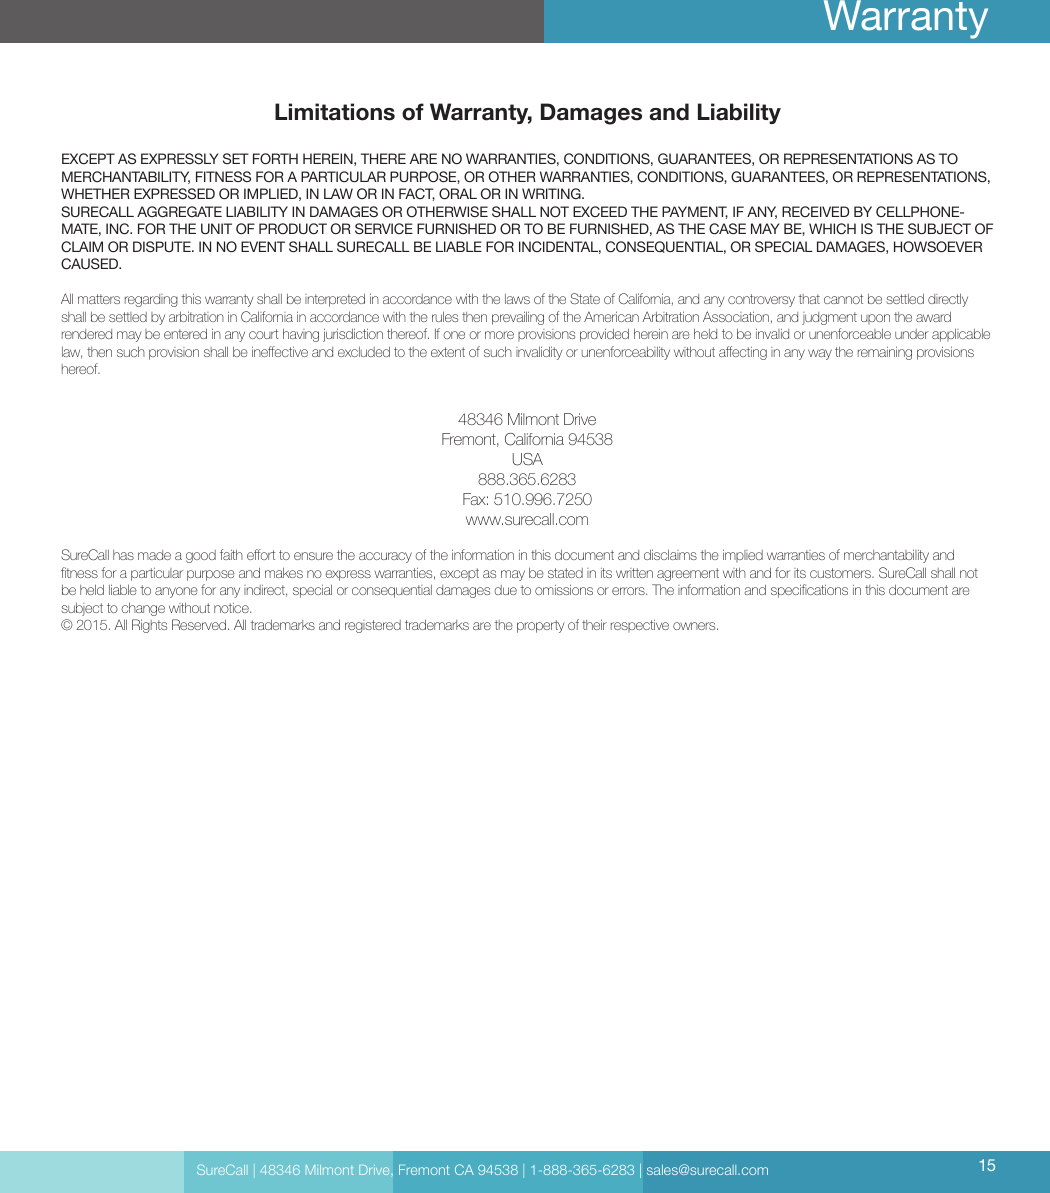 Limitations of Warranty, Damages and LiabilityEXCEPT AS EXPRESSLY SET FORTH HEREIN, THERE ARE NO WARRANTIES, CONDITIONS, GUARANTEES, OR REPRESENTATIONS AS TO MERCHANTABILITY, FITNESS FOR A PARTICULAR PURPOSE, OR OTHER WARRANTIES, CONDITIONS, GUARANTEES, OR REPRESENTATIONS, WHETHER EXPRESSED OR IMPLIED, IN LAW OR IN FACT, ORAL OR IN WRITING.SURECALL AGGREGATE LIABILITY IN DAMAGES OR OTHERWISE SHALL NOT EXCEED THE PAYMENT, IF ANY, RECEIVED BY CELLPHONE-MATE, INC. FOR THE UNIT OF PRODUCT OR SERVICE FURNISHED OR TO BE FURNISHED, AS THE CASE MAY BE, WHICH IS THE SUBJECT OF CLAIM OR DISPUTE. IN NO EVENT SHALL SURECALL BE LIABLE FOR INCIDENTAL, CONSEQUENTIAL, OR SPECIAL DAMAGES, HOWSOEVER CAUSED. All matters regarding this warranty shall be interpreted in accordance with the laws of the State of California, and any controversy that cannot be settled directly shall be settled by arbitration in California in accordance with the rules then prevailing of the American Arbitration Association, and judgment upon the award rendered may be entered in any court having jurisdiction thereof. If one or more provisions provided herein are held to be invalid or unenforceable under applicable law, then such provision shall be ineective and excluded to the extent of such invalidity or unenforceability without aecting in any way the remaining provisions hereof.48346 Milmont DriveFremont, California 94538USA888.365.6283Fax: 510.996.7250www.surecall.comSureCall has made a good faith eort to ensure the accuracy of the information in this document and disclaims the implied warranties of merchantability and tness for a particular purpose and makes no express warranties, except as may be stated in its written agreement with and for its customers. SureCall shall not be held liable to anyone for any indirect, special or consequential damages due to omissions or errors. The information and specications in this document are subject to change without notice. © 2015. All Rights Reserved. All trademarks and registered trademarks are the property of their respective owners.SureCall | 48346 Milmont Drive, Fremont CA 94538 | 1-888-365-6283 | sales@surecall.com 15Warranty